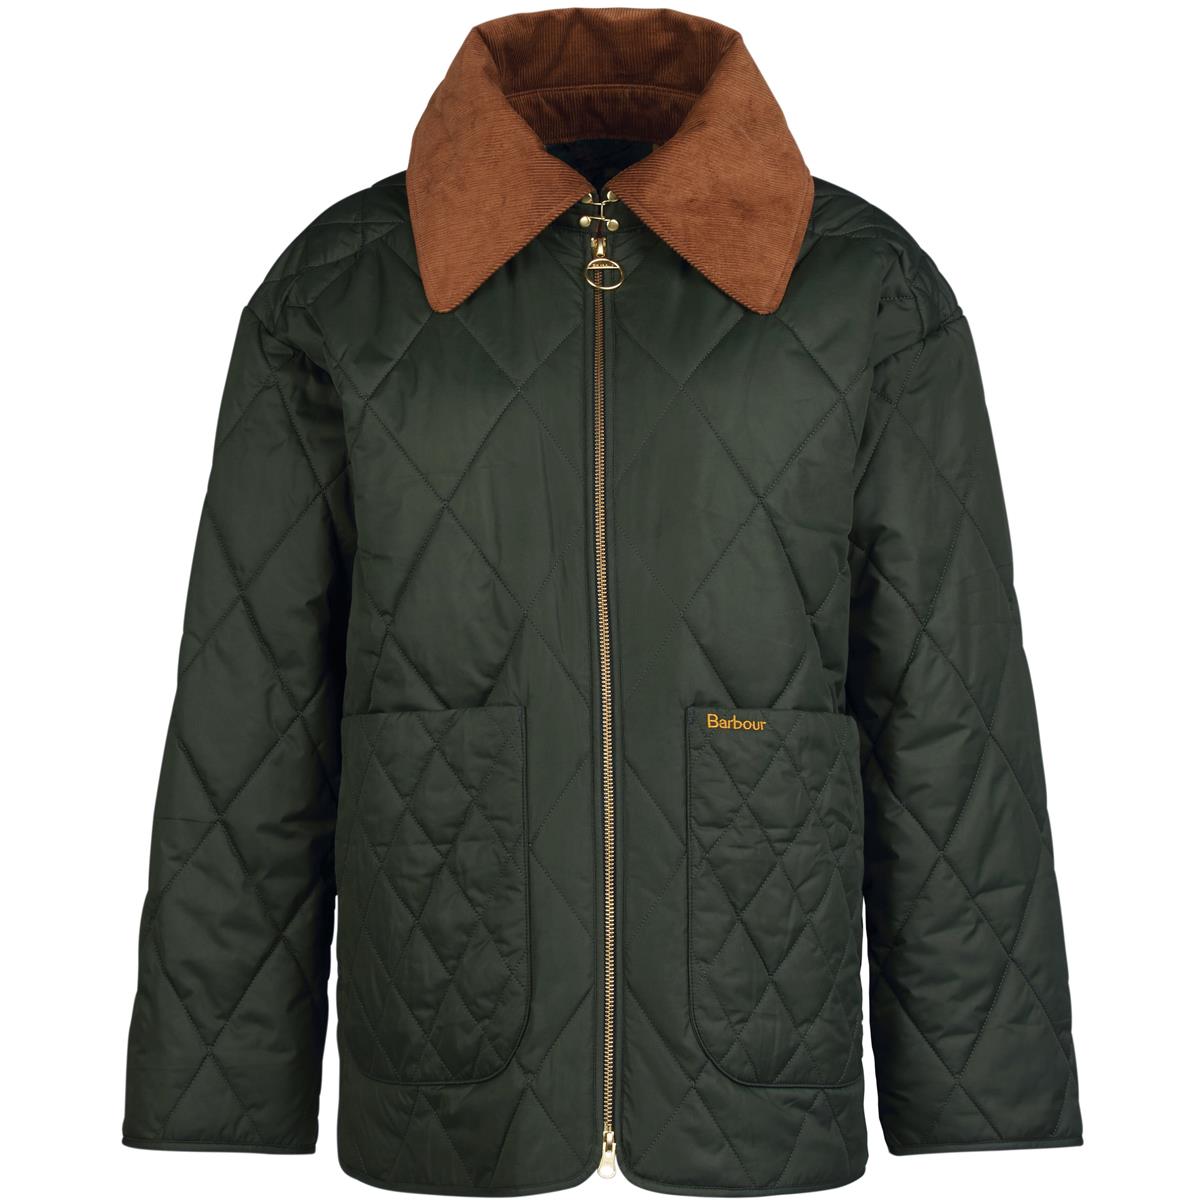 How long is the Barbour Womens Woodhall Quilt Jacket from top to bottom?